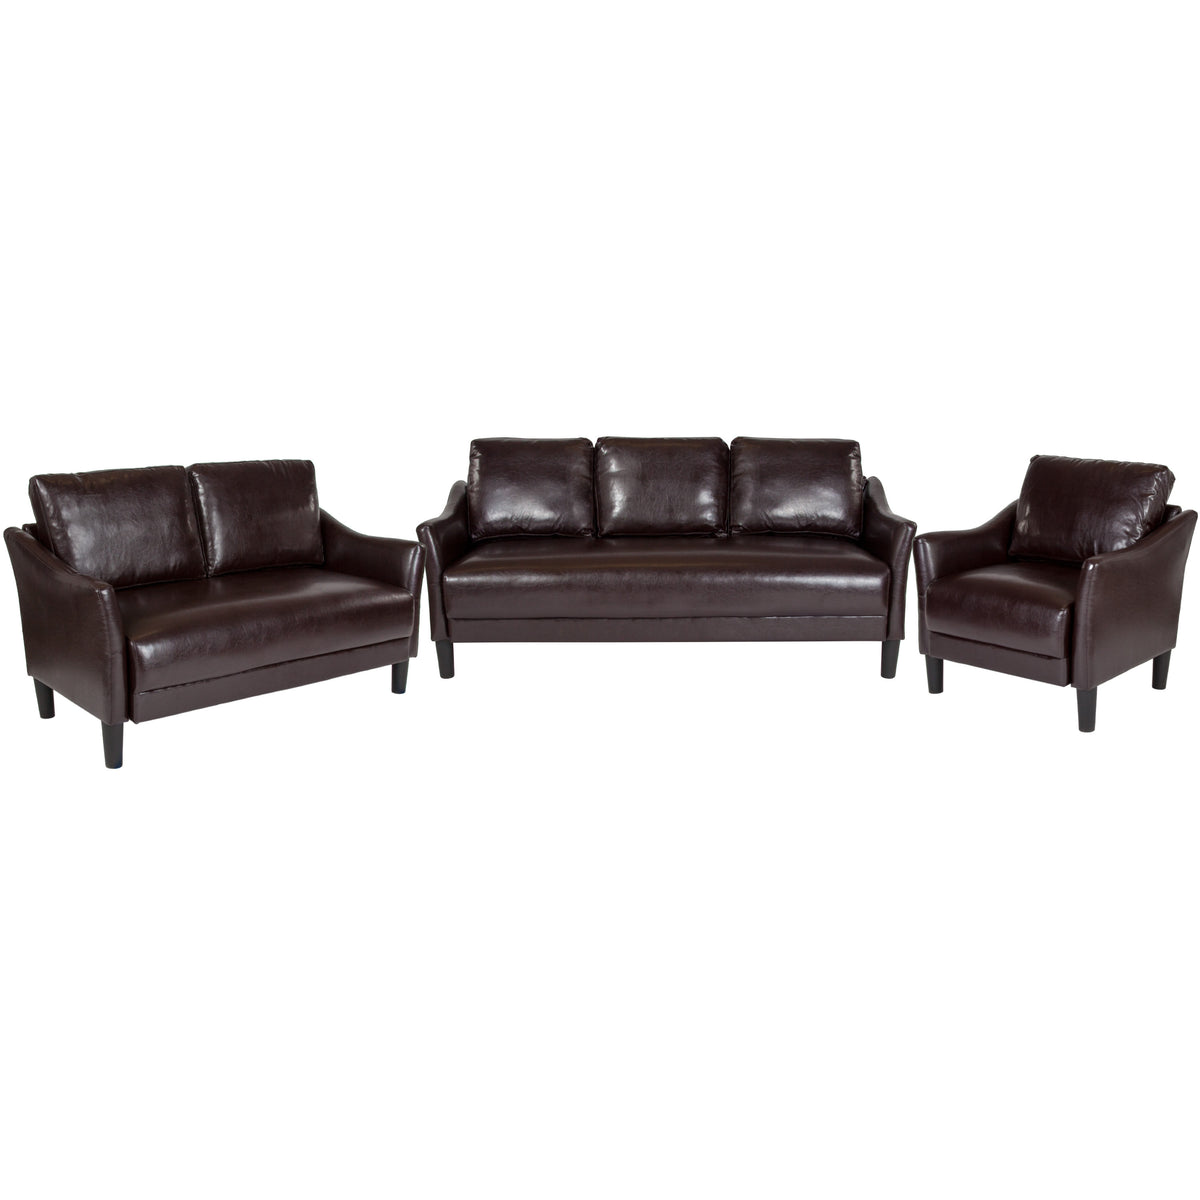 Brown LeatherSoft |#| 3 Piece Upholstered Living Room Set w/Single Cushion Seat in Brown LeatherSoft